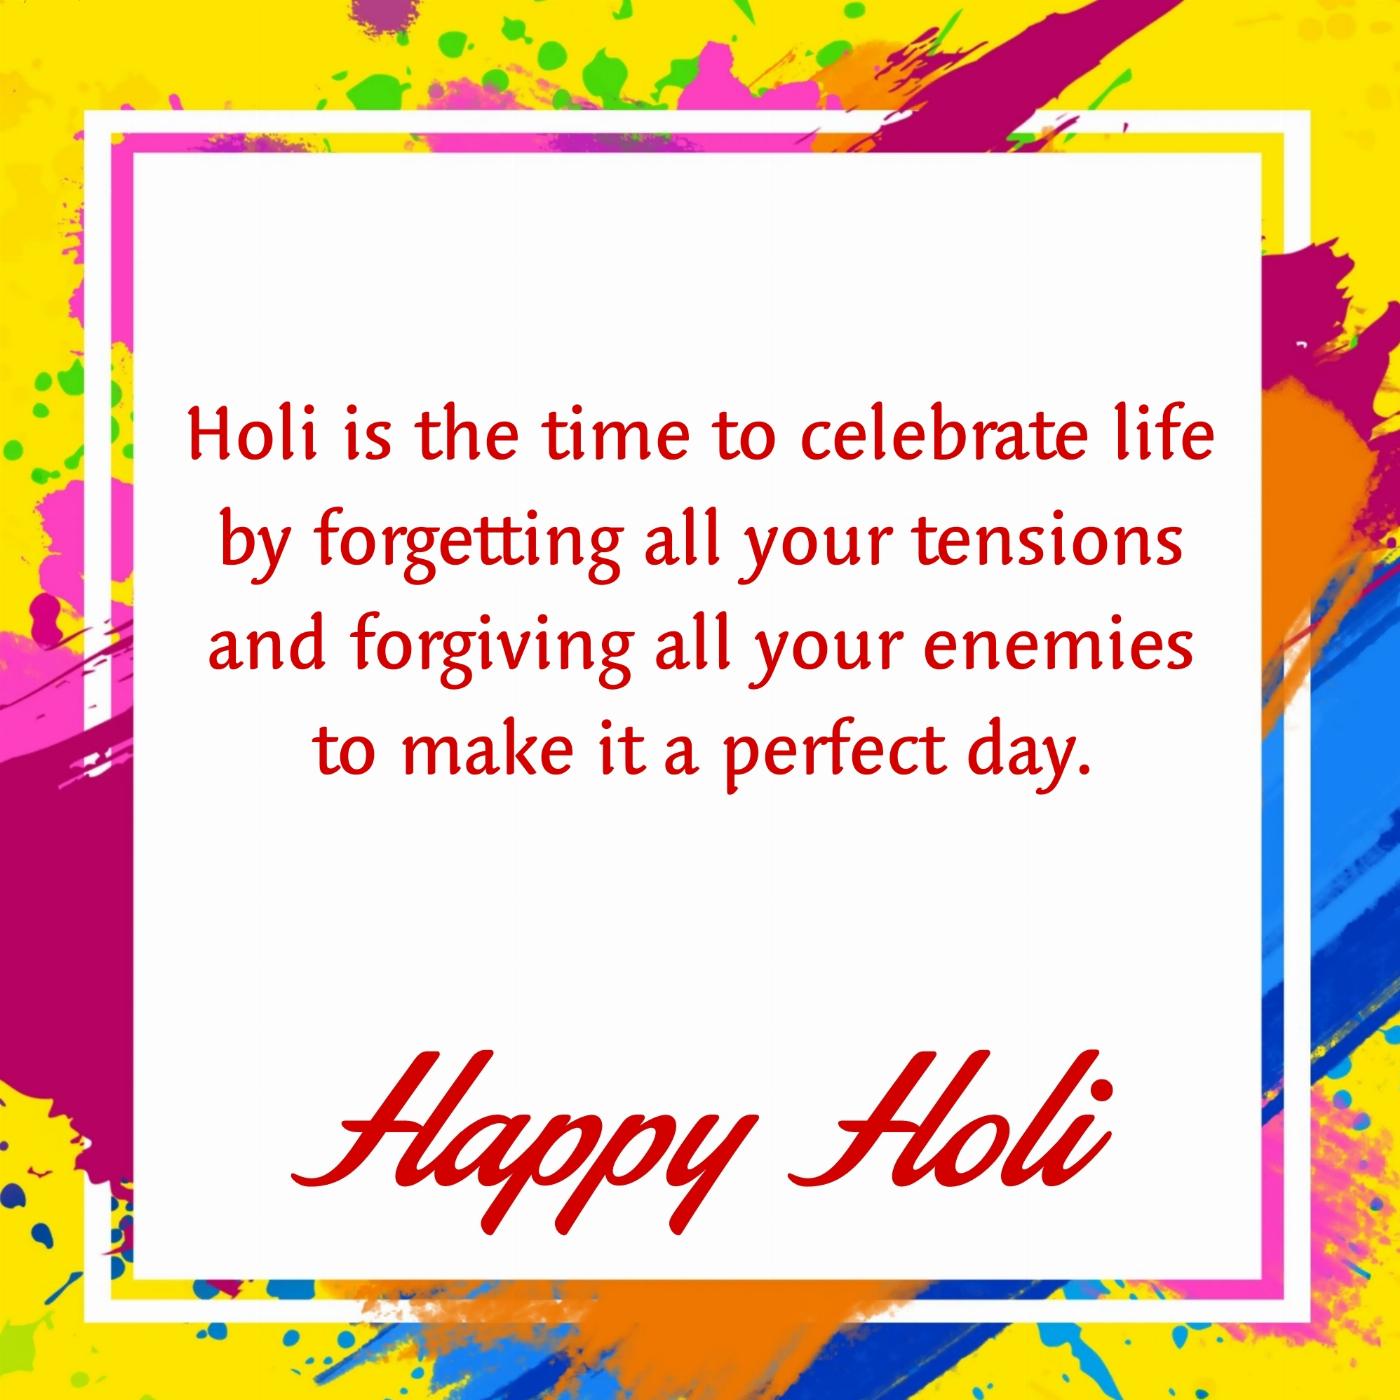 Holi is the time to celebrate life by forgetting all your tensions